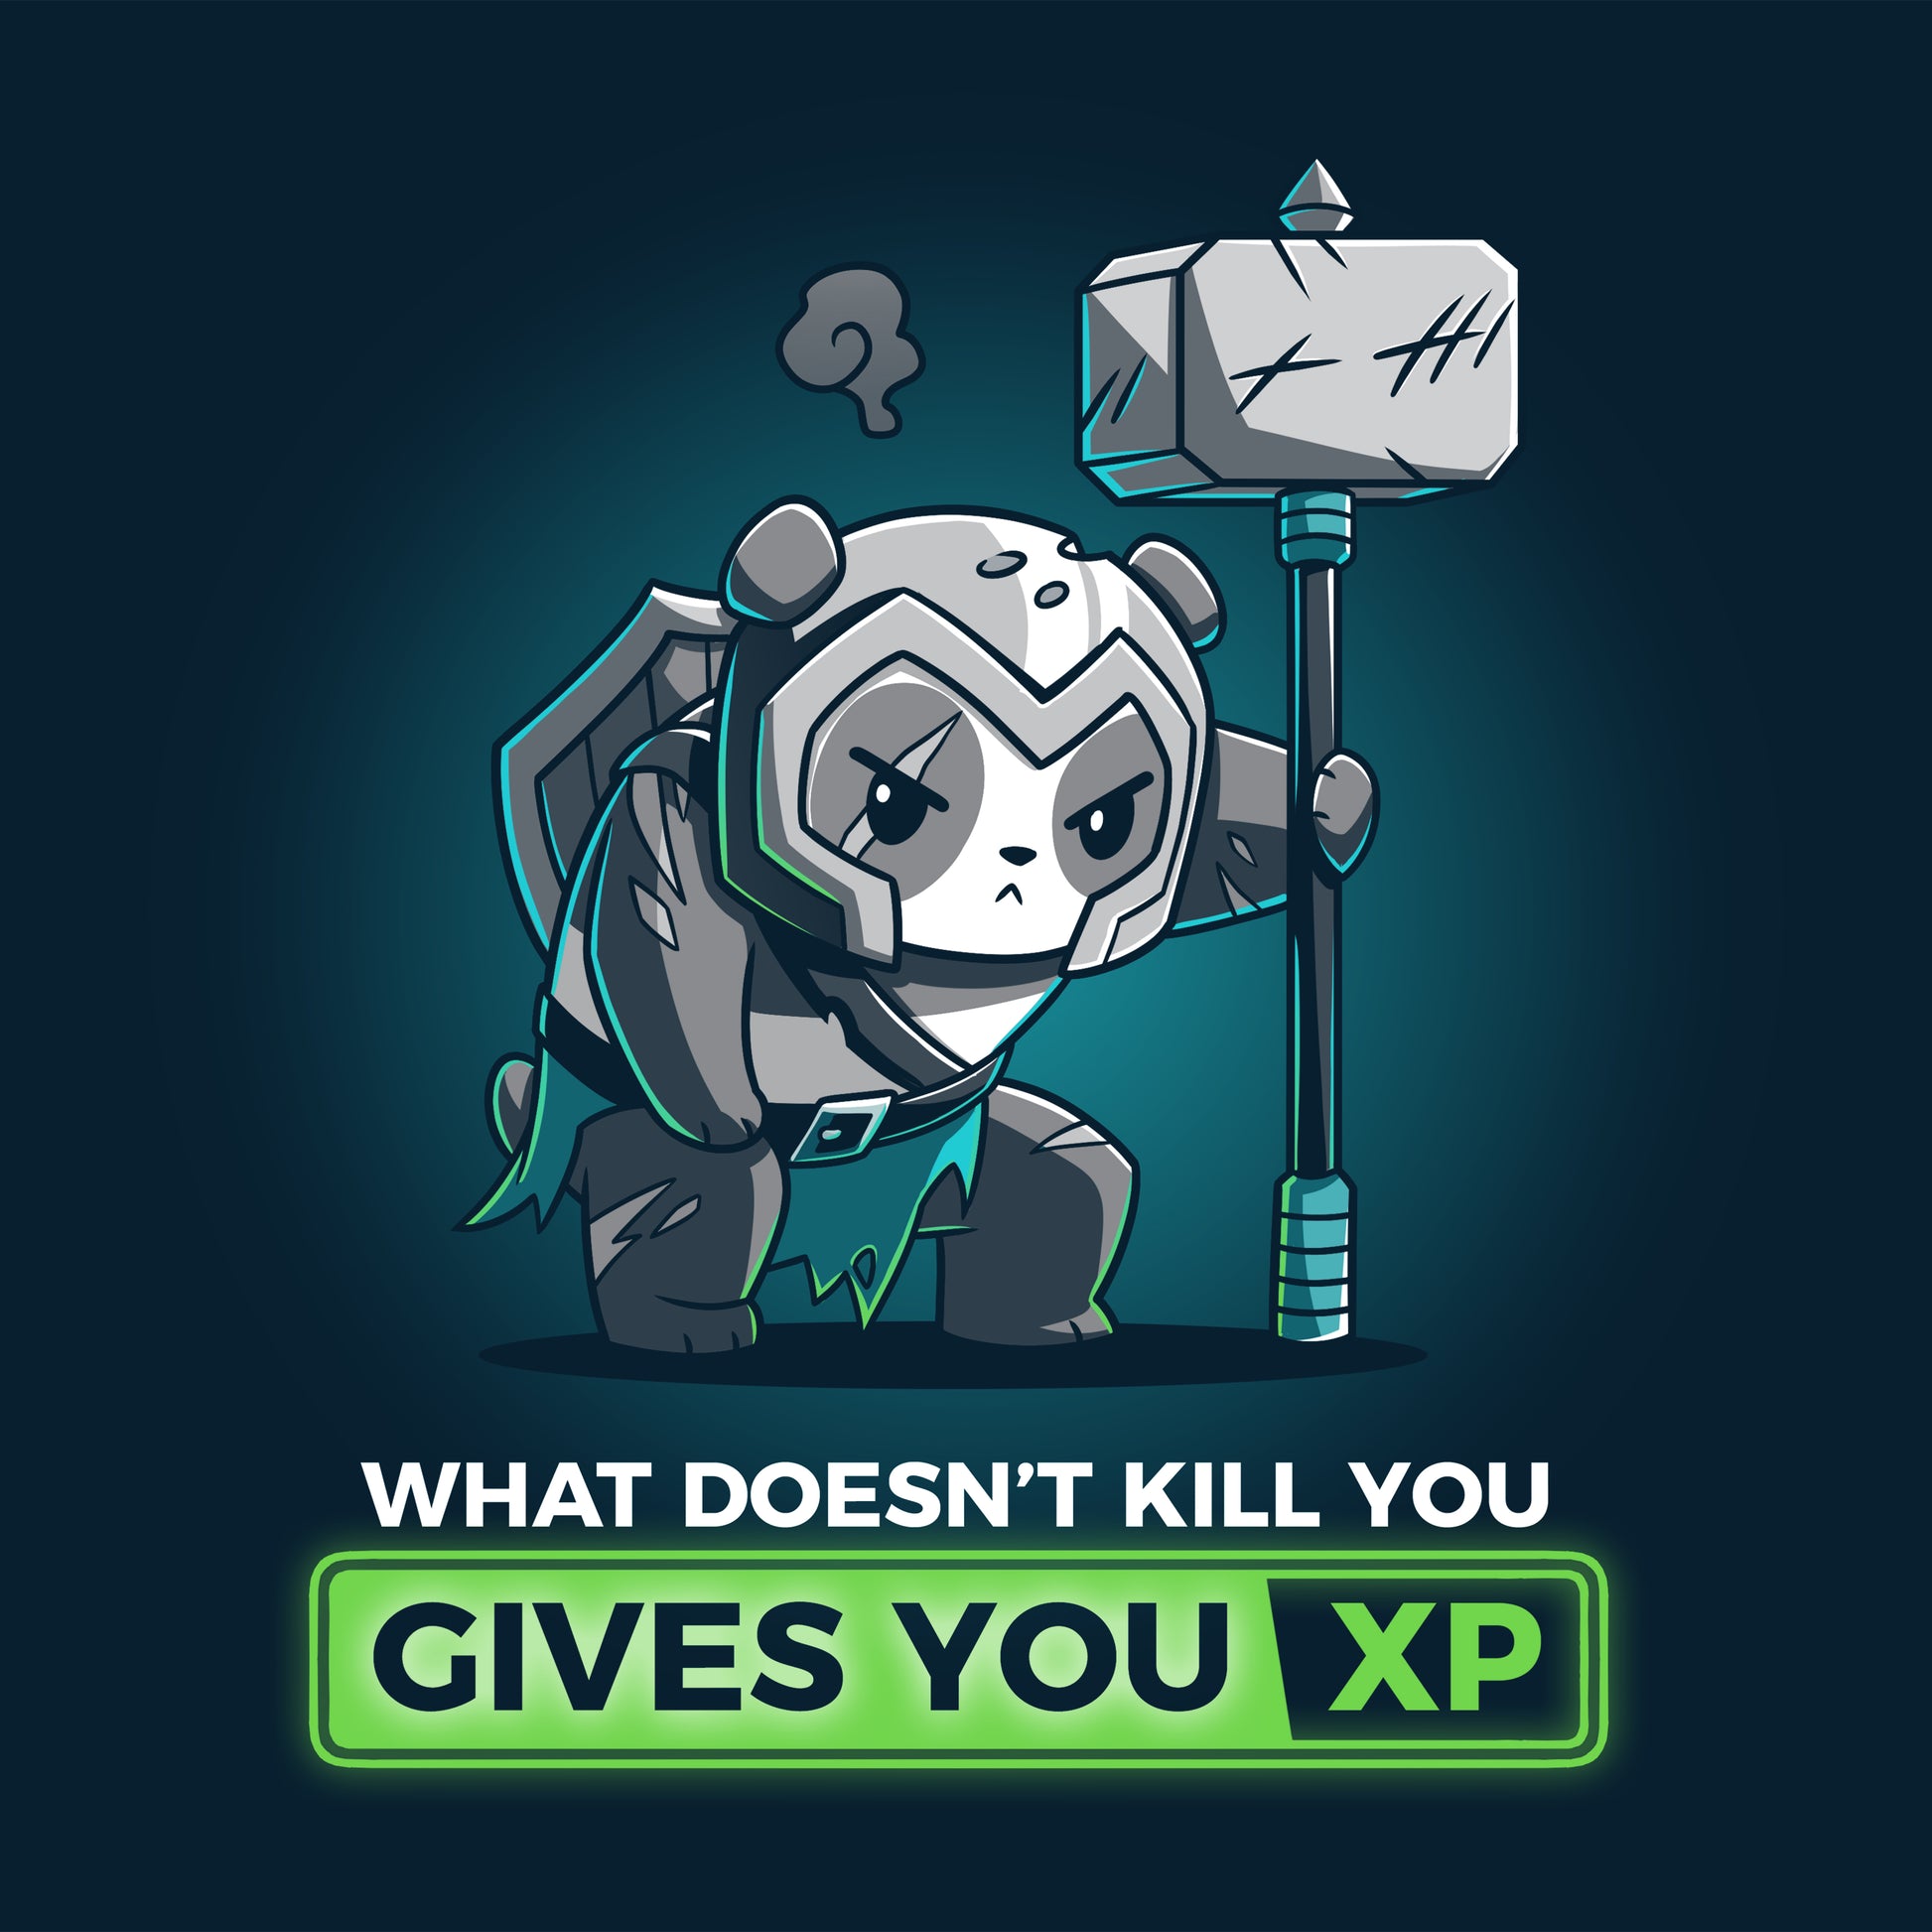 What What Doesn’t Kill You Gives You XP doesn't kill you gives you XP at tabletop game night with TeeTurtle.